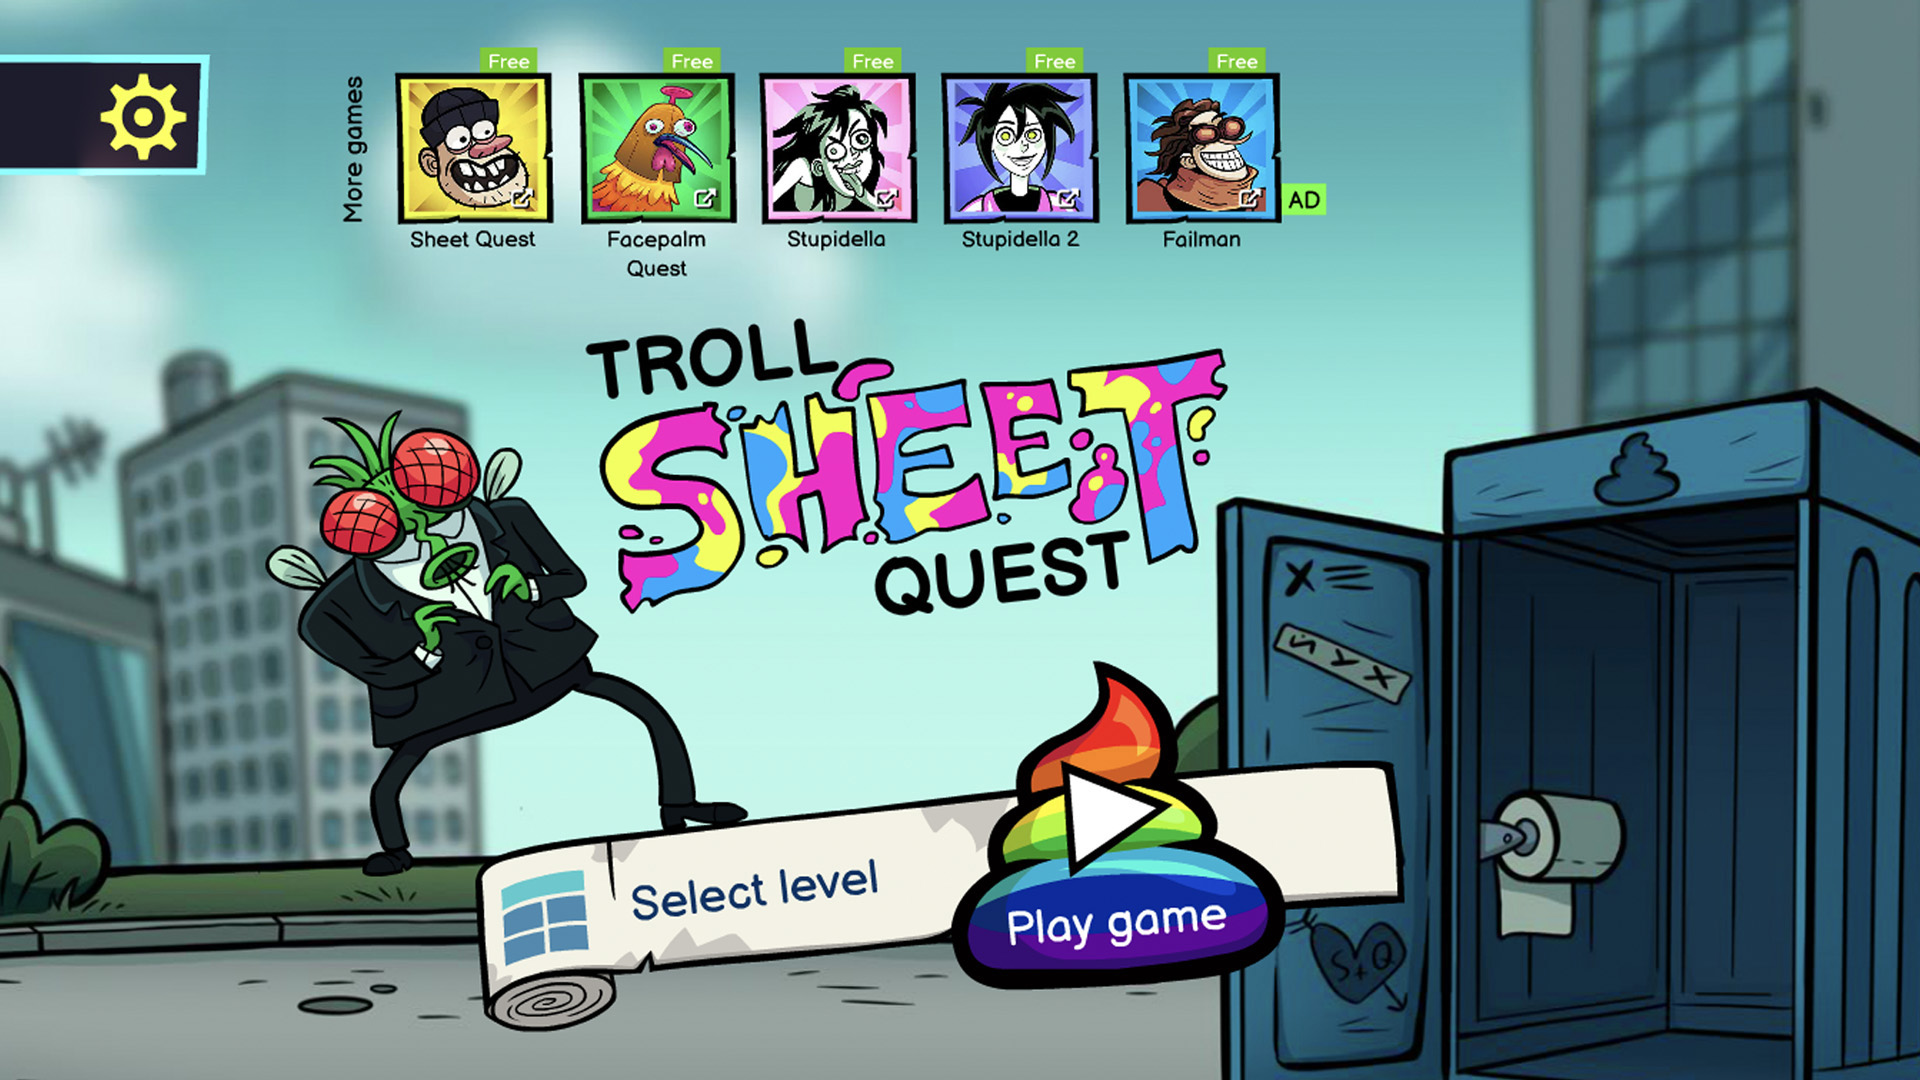 Scarica Troll Sheet Quest gratis per Android.